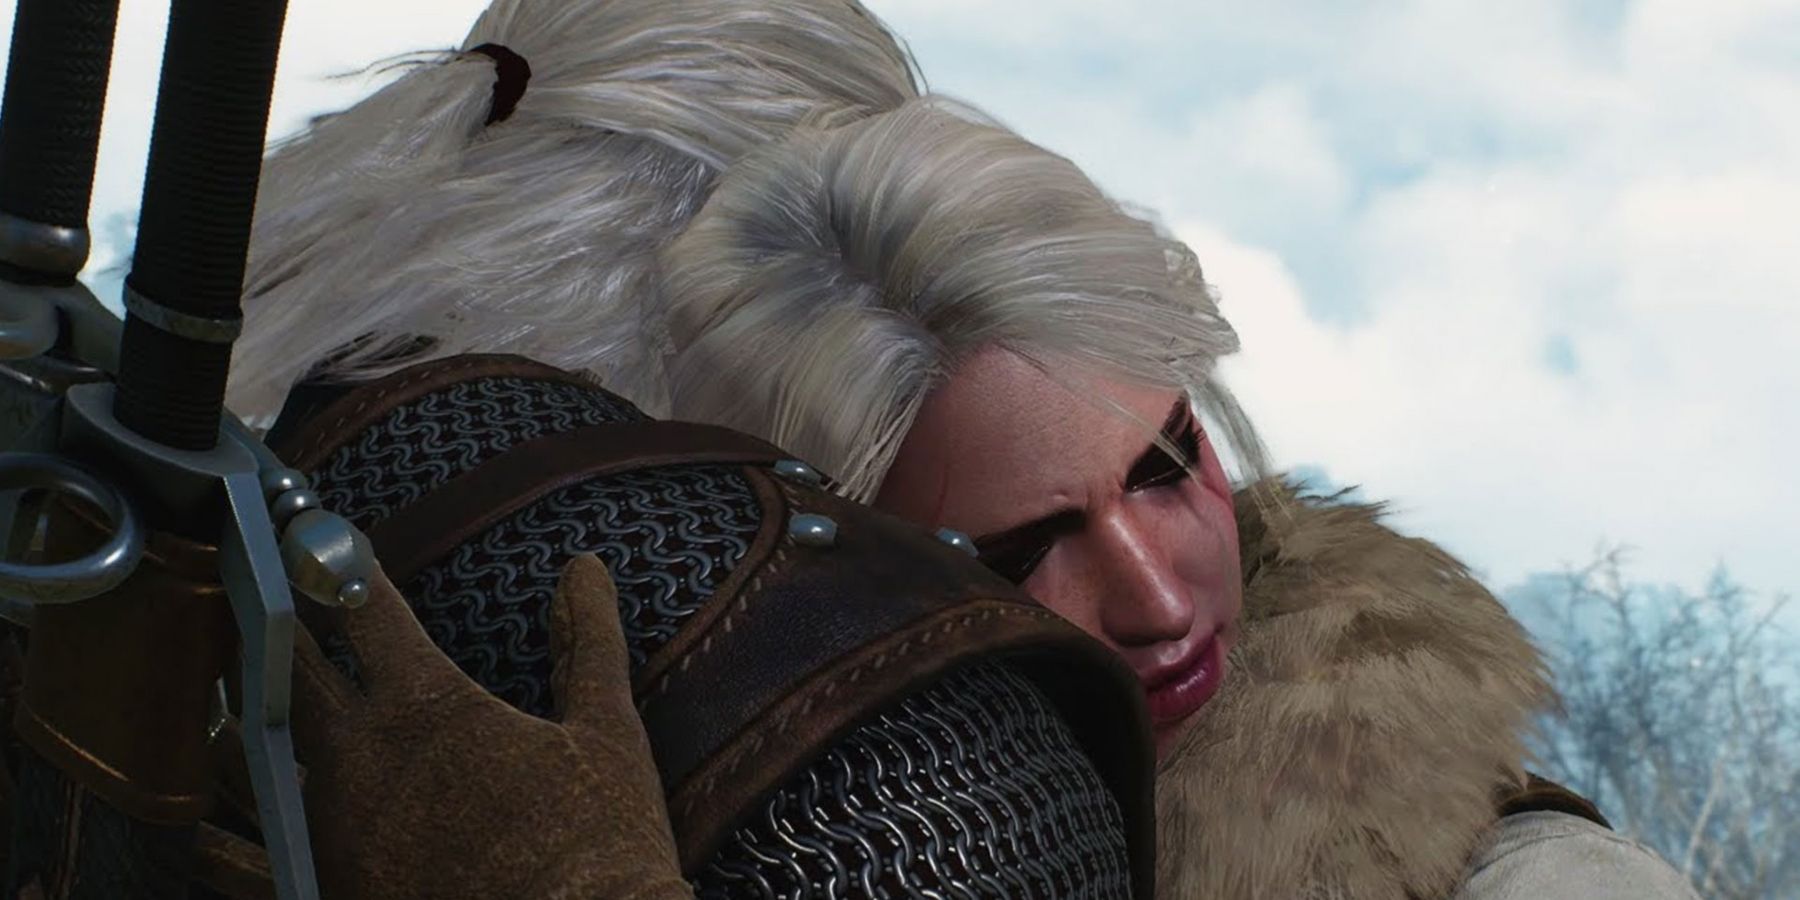 The Witcher 3 has two generally positive endings